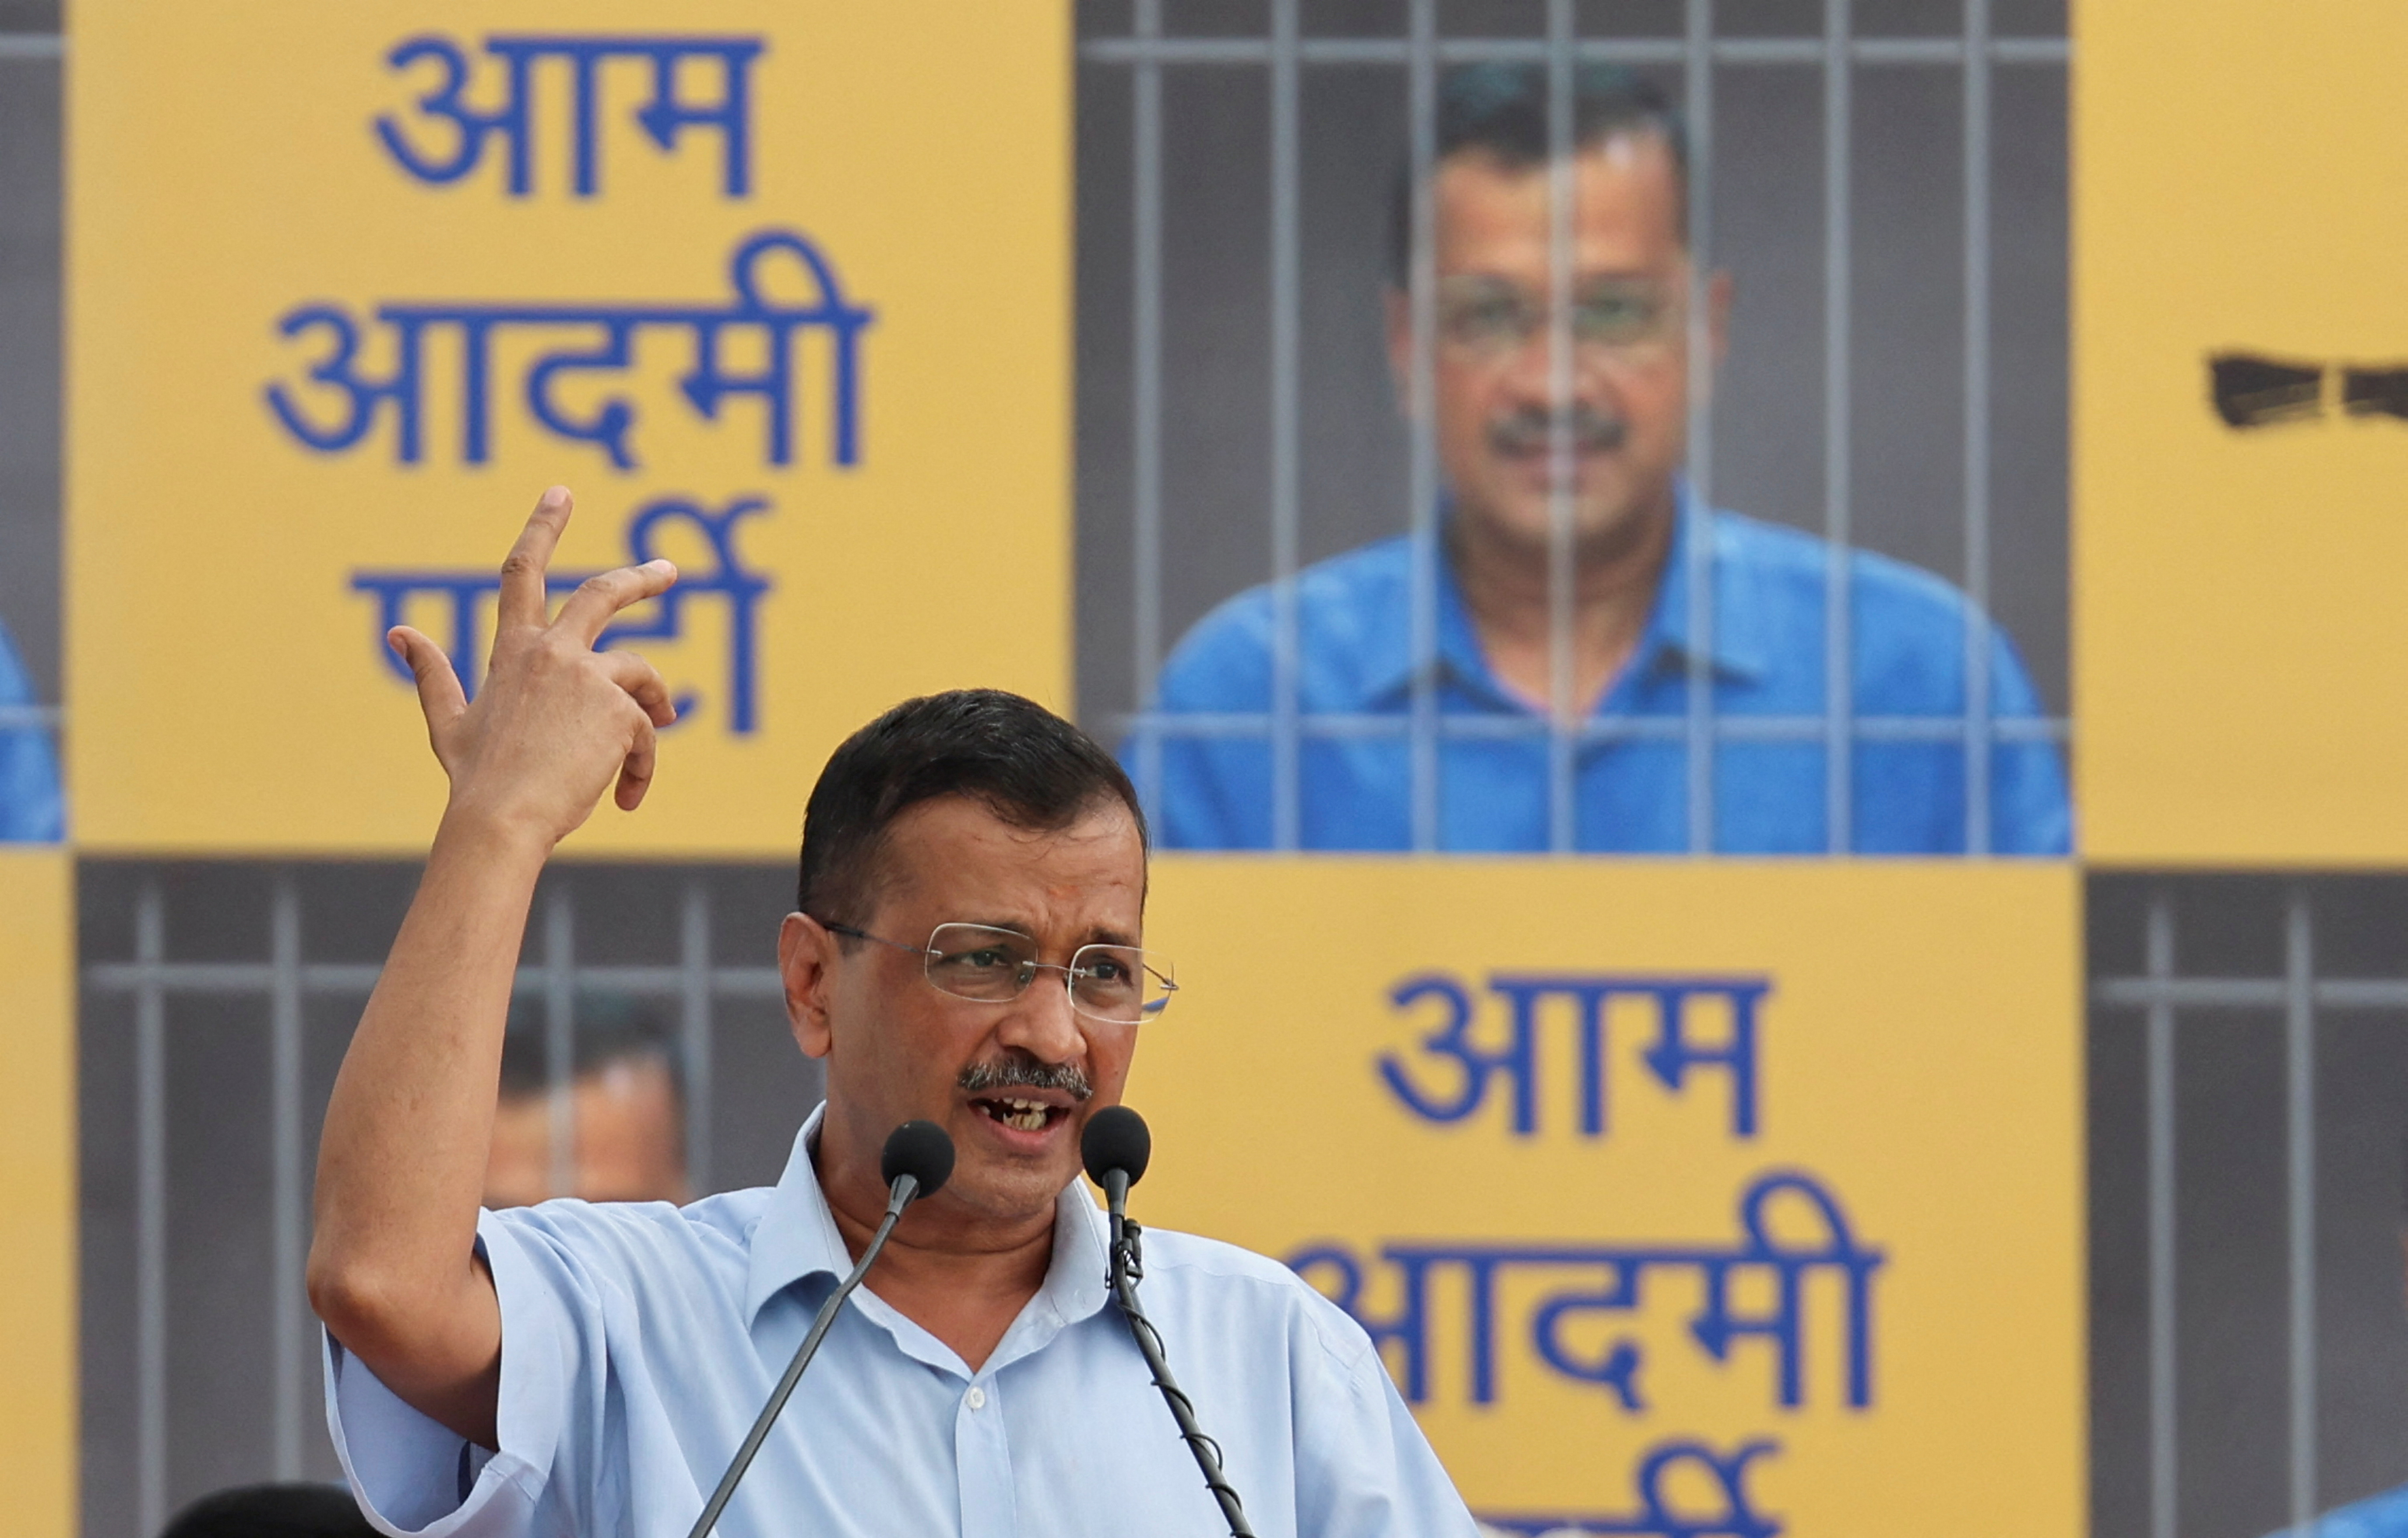 Delhi Chief Minister Arvind Kejriwal addresses supporters and members of Aam Aadmi Party (AAP) in New Delhi